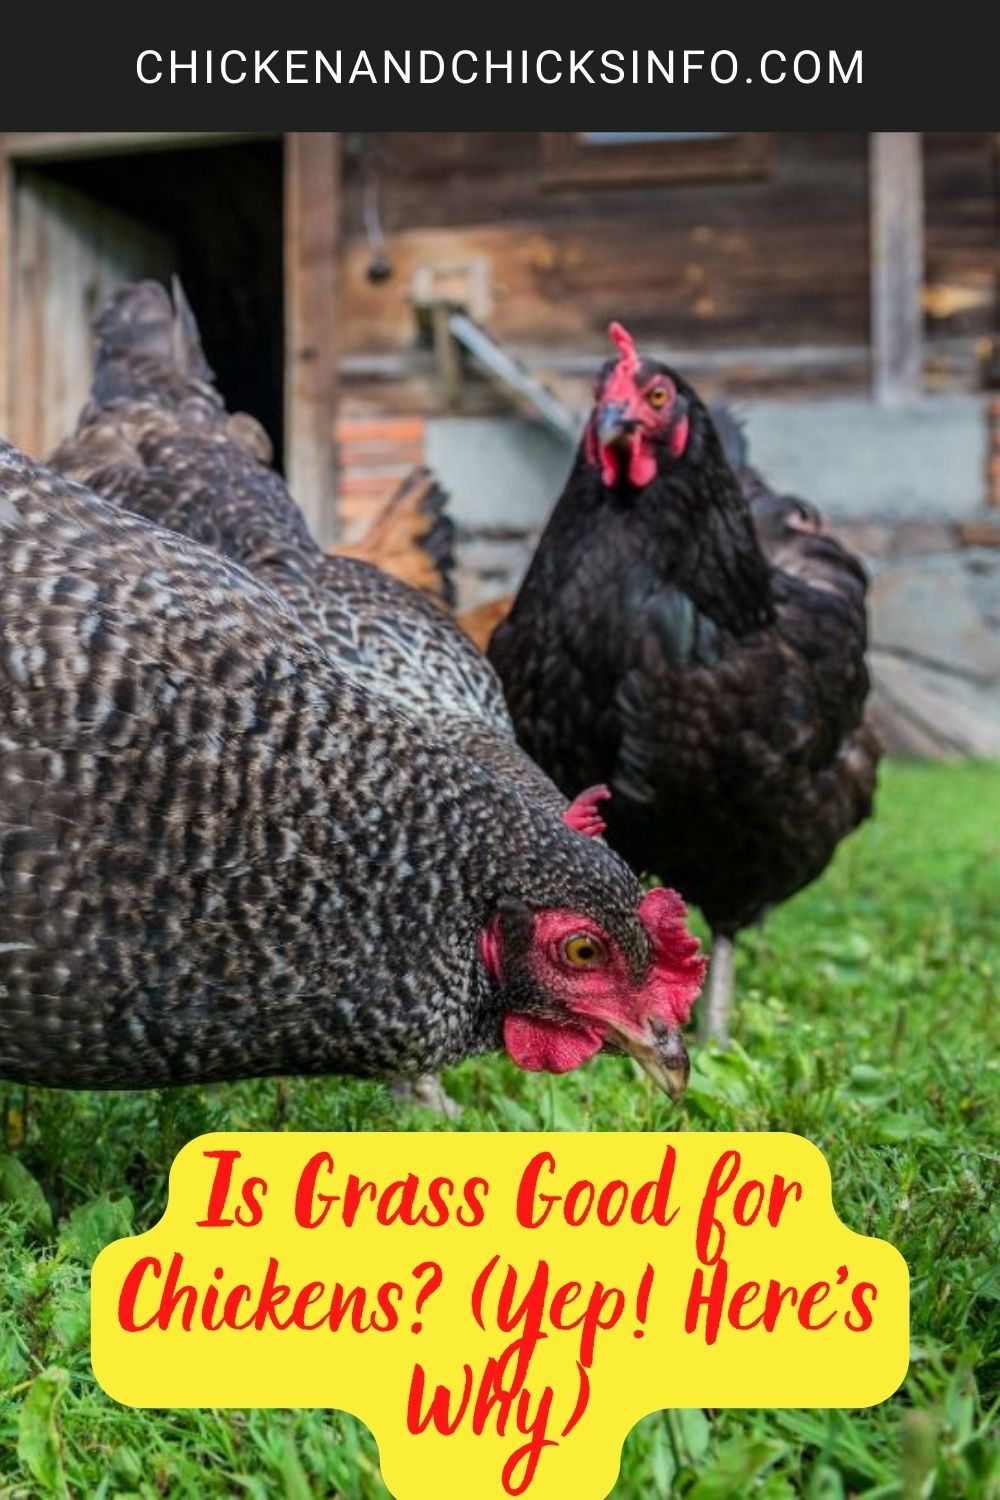 Is Grass Good for Chickens? (Yep! Here's Why) poster.
